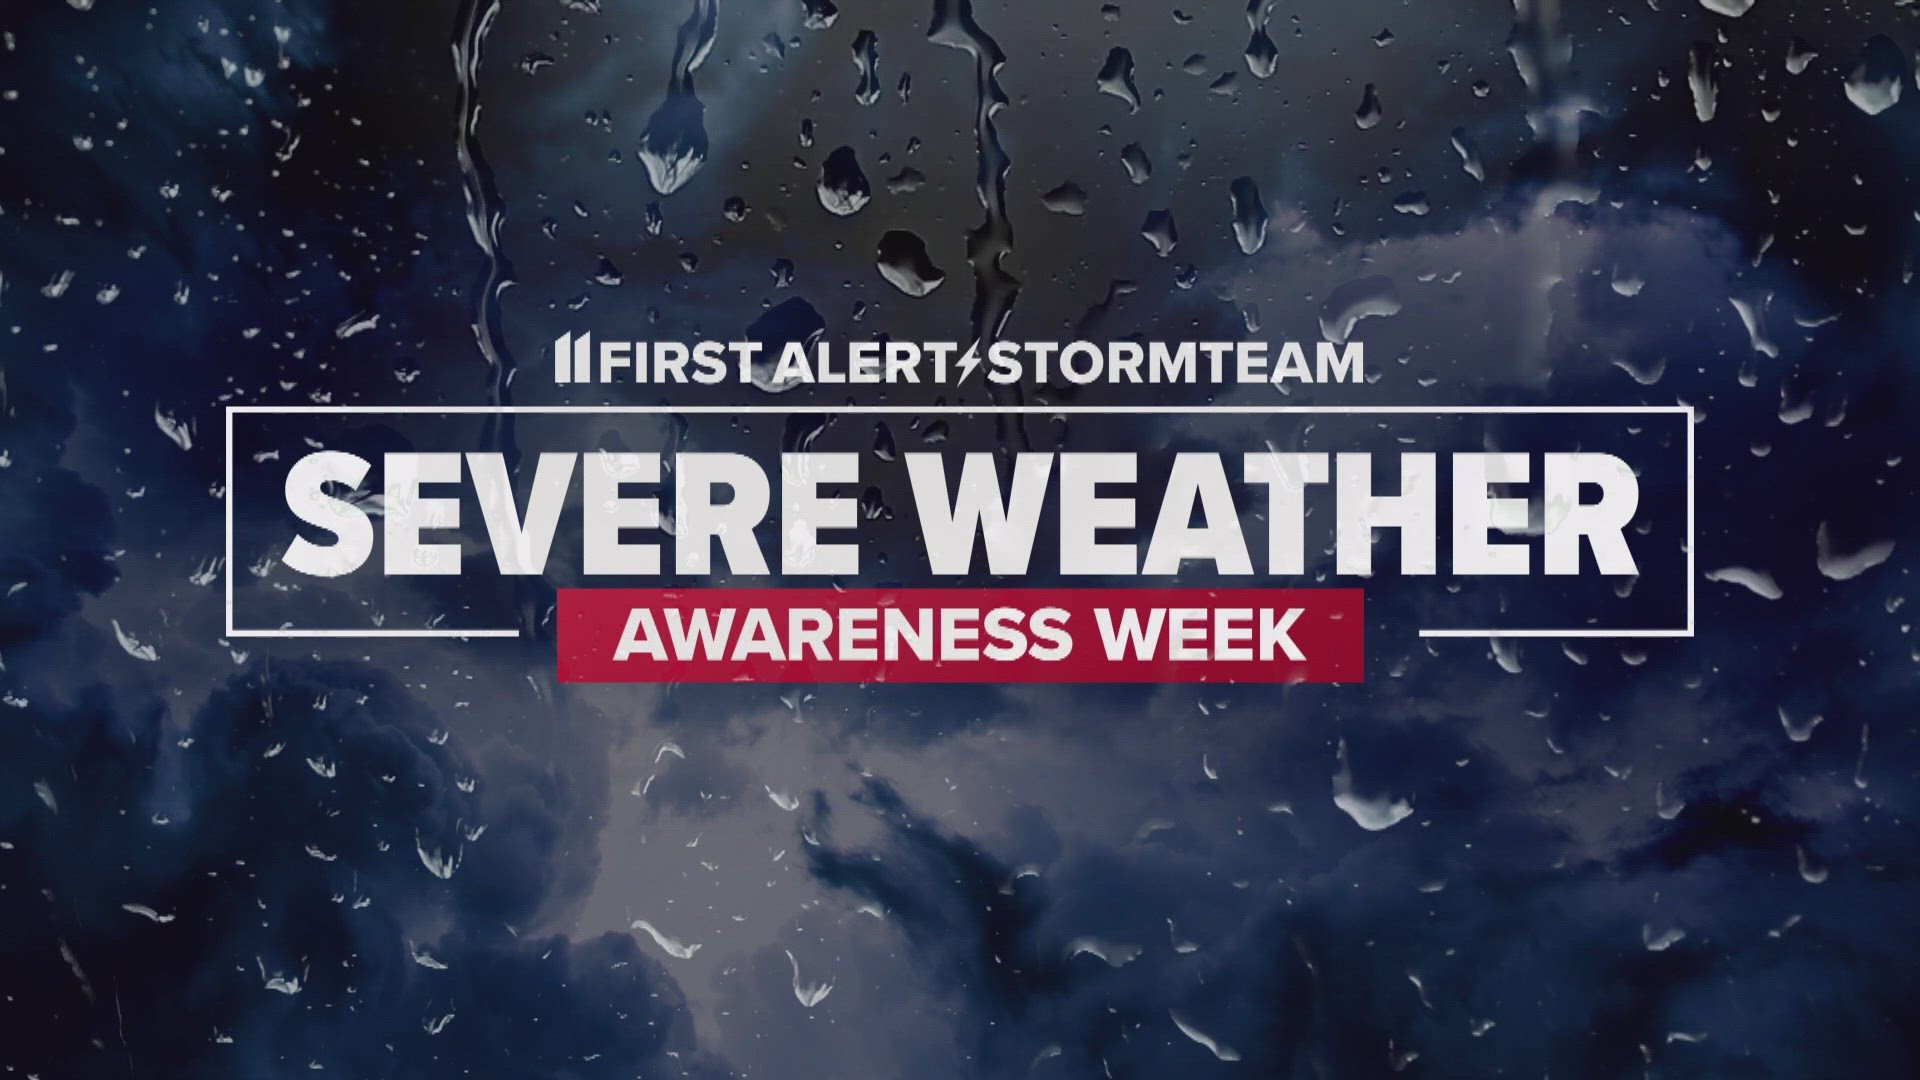 The WHAS11 First Alert Stormteam is keeping you safe before severe weather strikes. | Special for Severe Weather Awareness Week 2023.